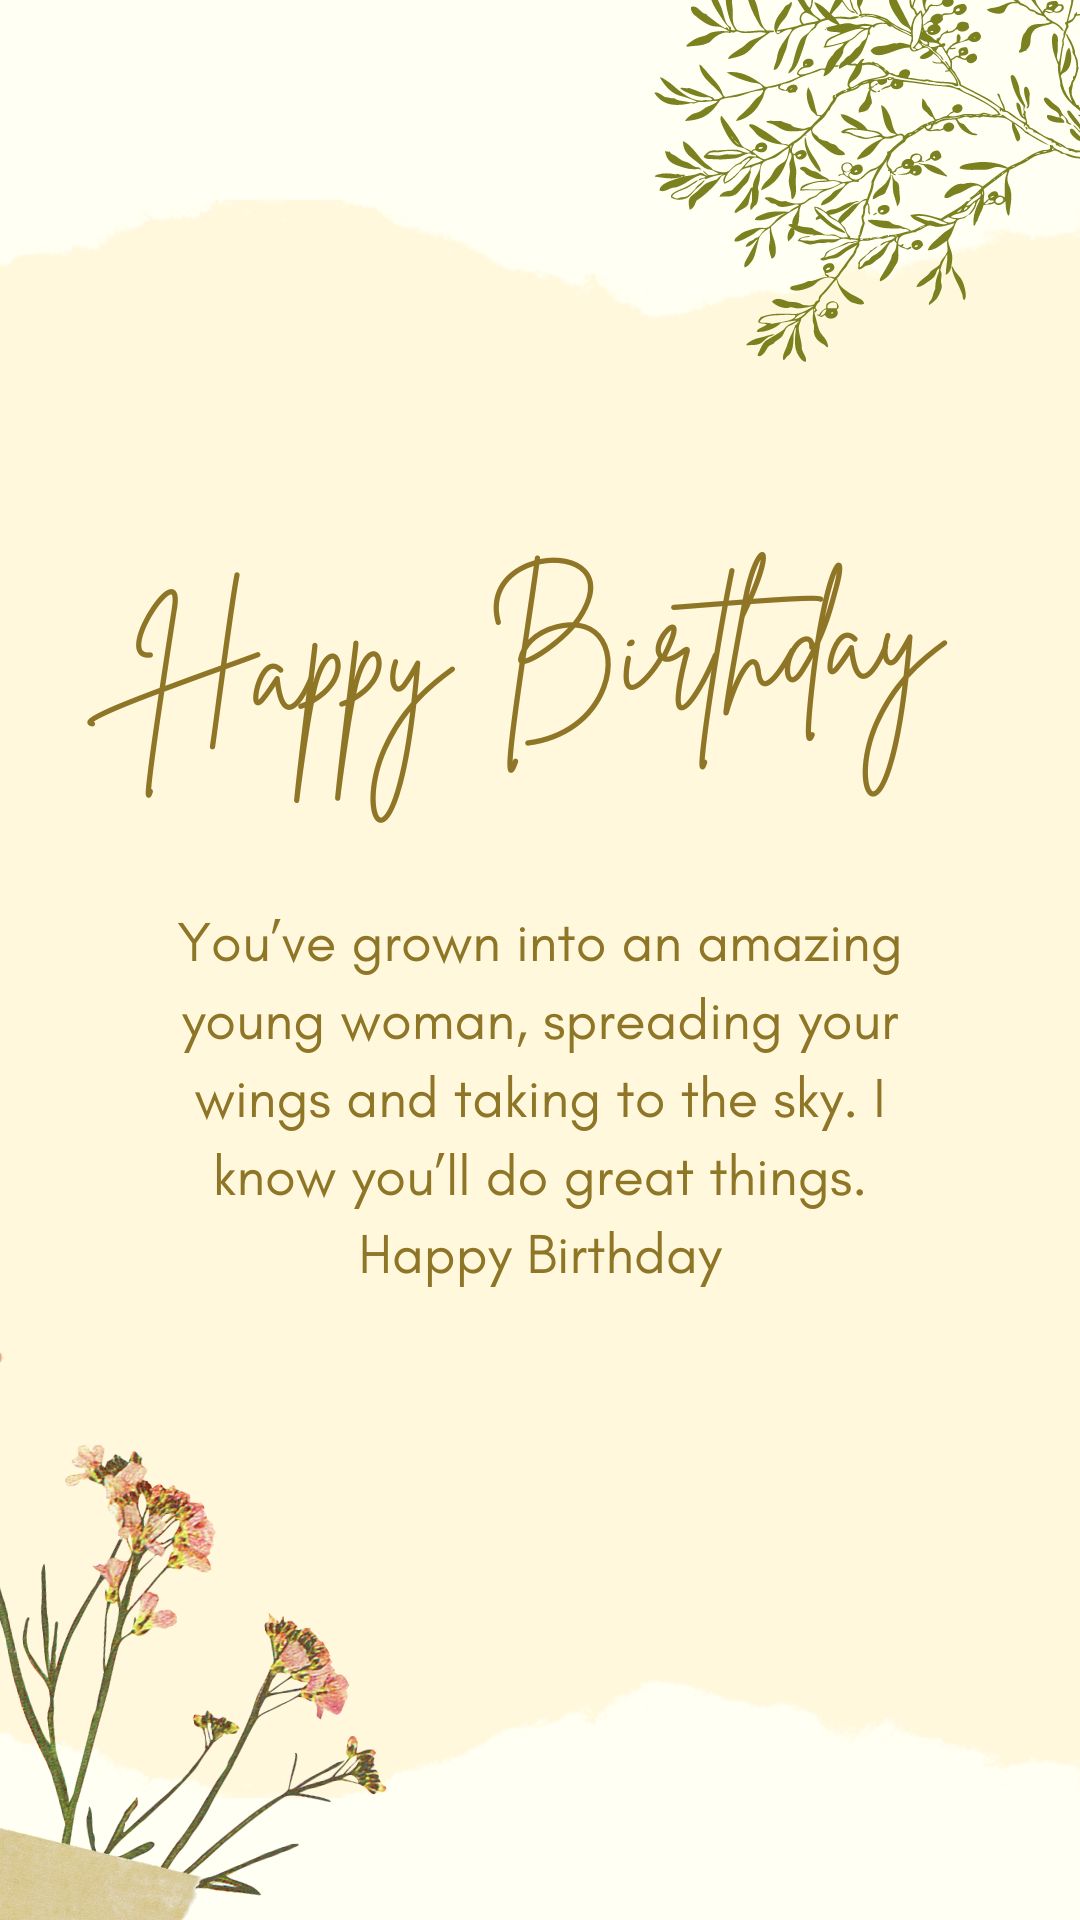 10+ Birthday images for daughter - greetingspixel.com